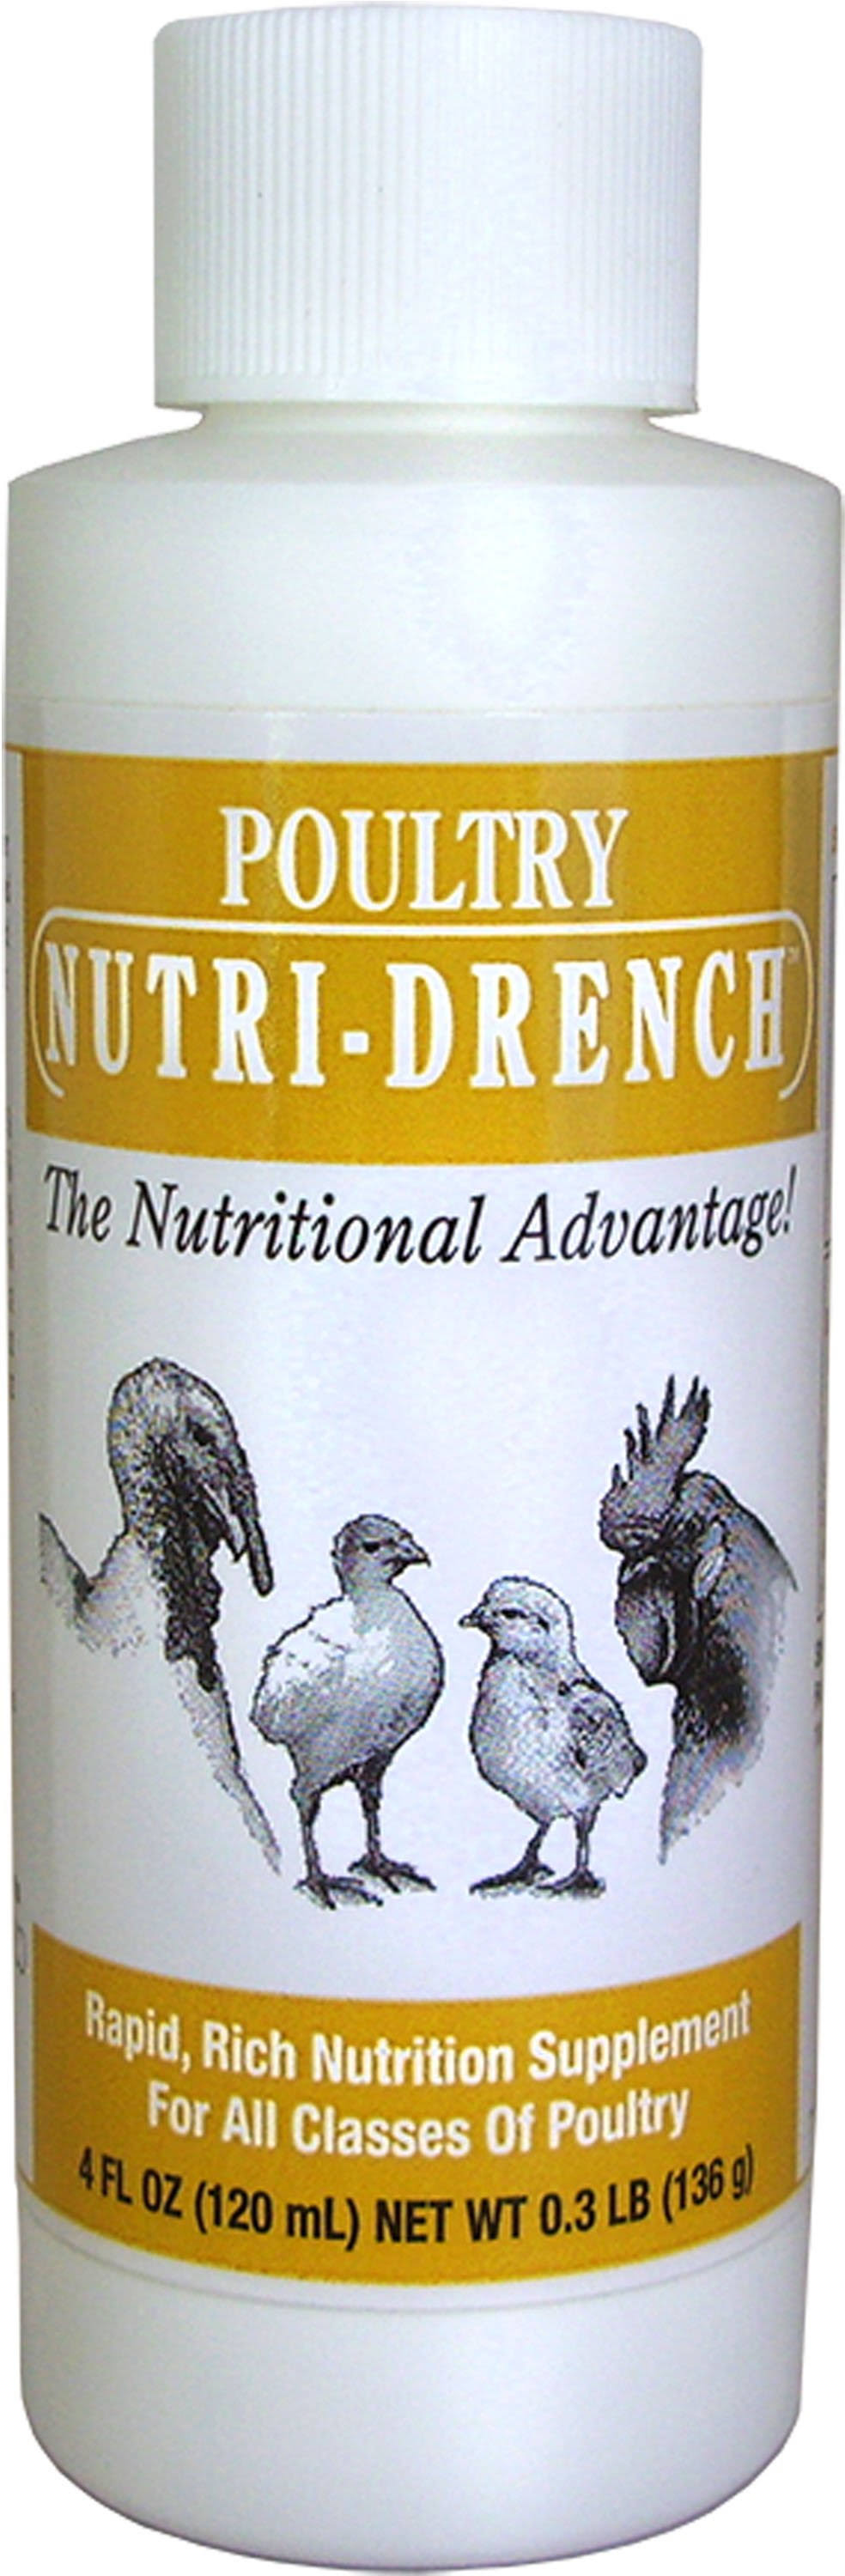 Poultry Nutri-Drench Nutrition Supplement